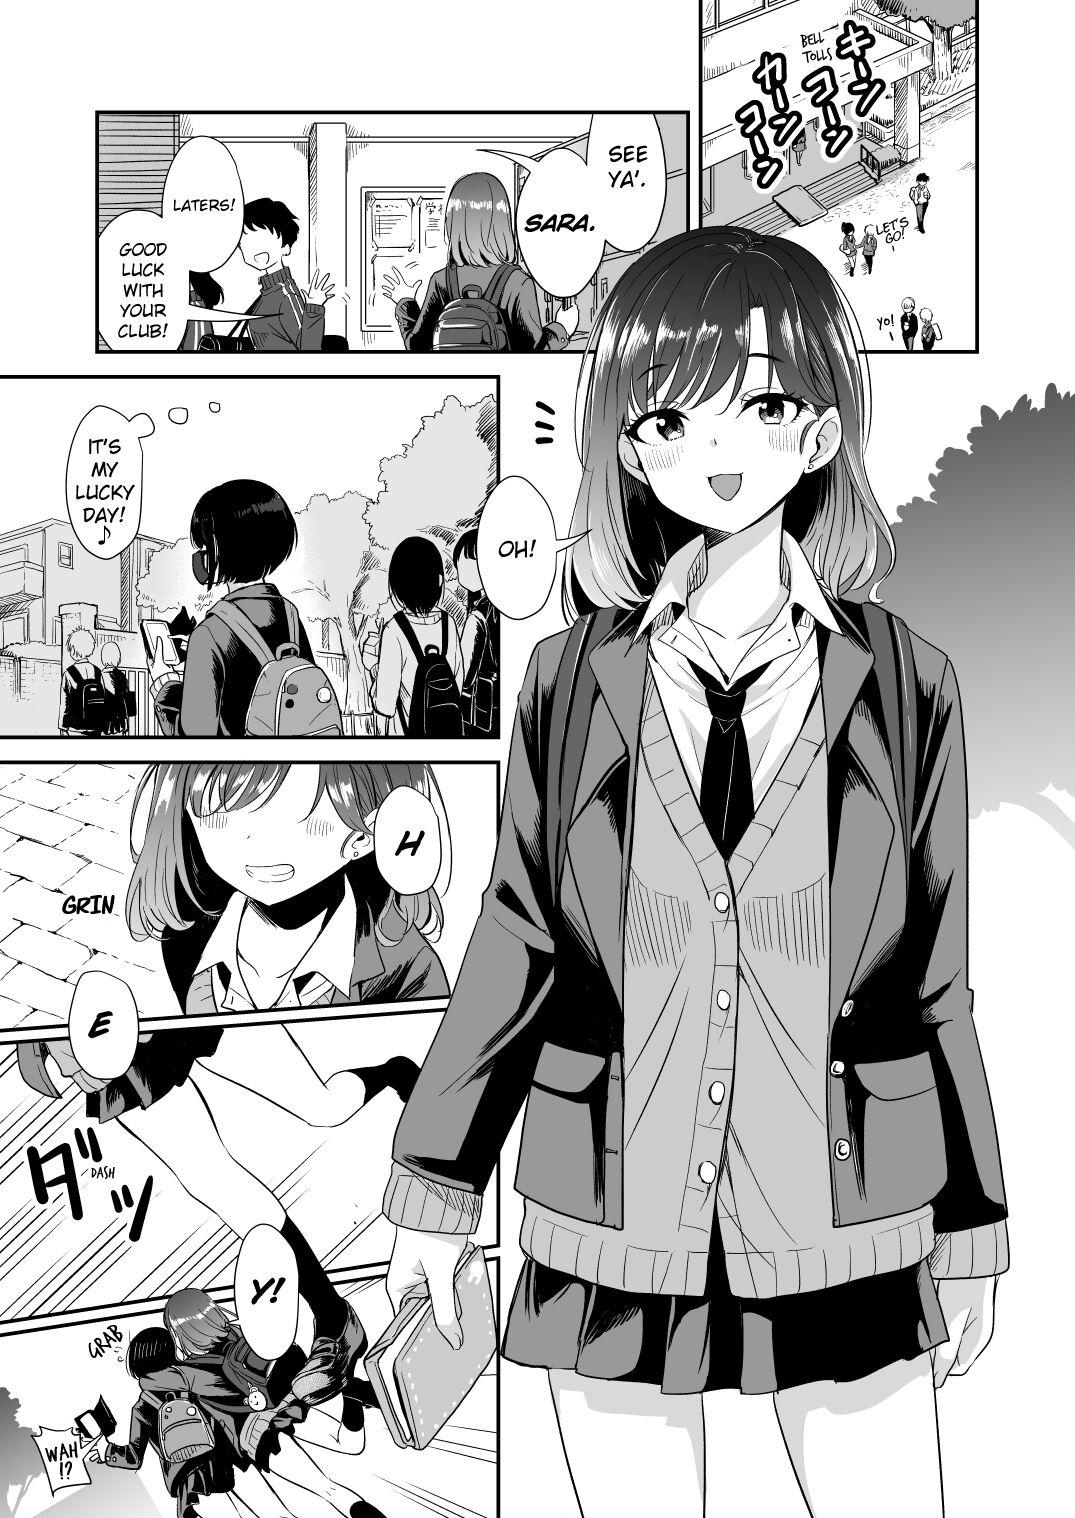 People Having Sex Kyou Oya, Inai kara | My Parents Aren't Home Today, So... Perra - Page 3